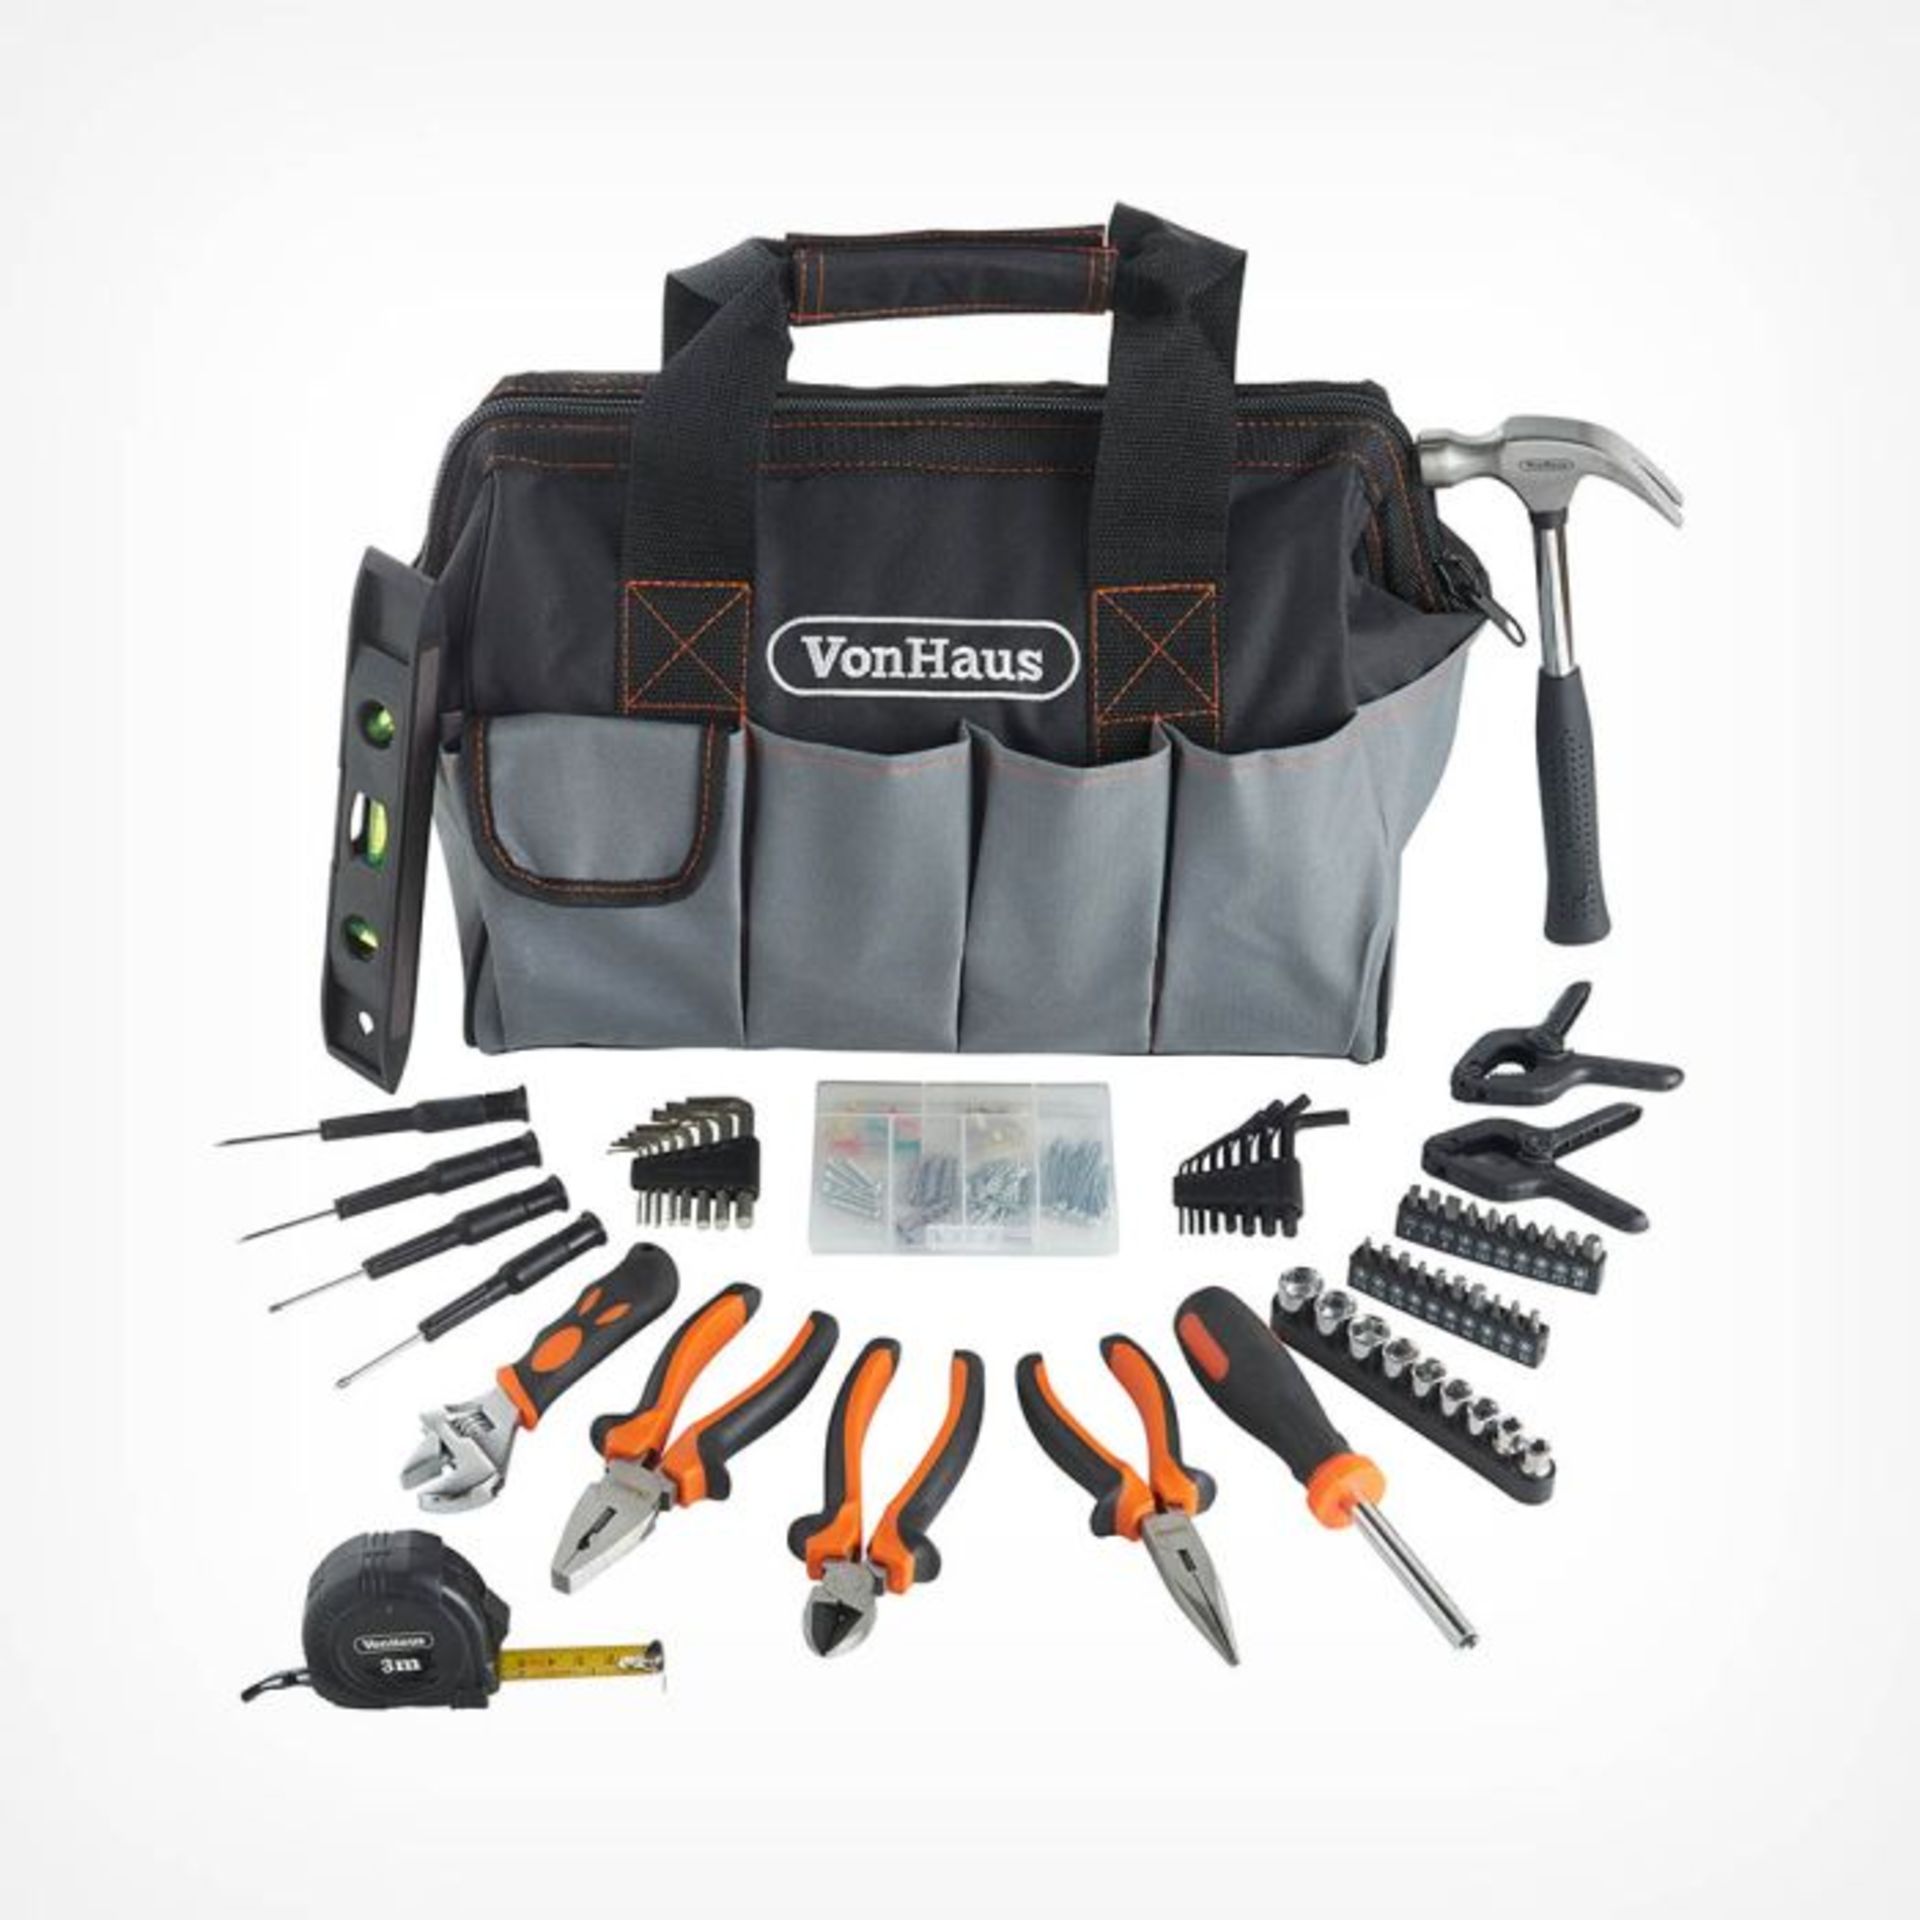 92 Piece Tool Kit & Bag. -ER34. Carry out everyday repairs as well as electrical, decoration,